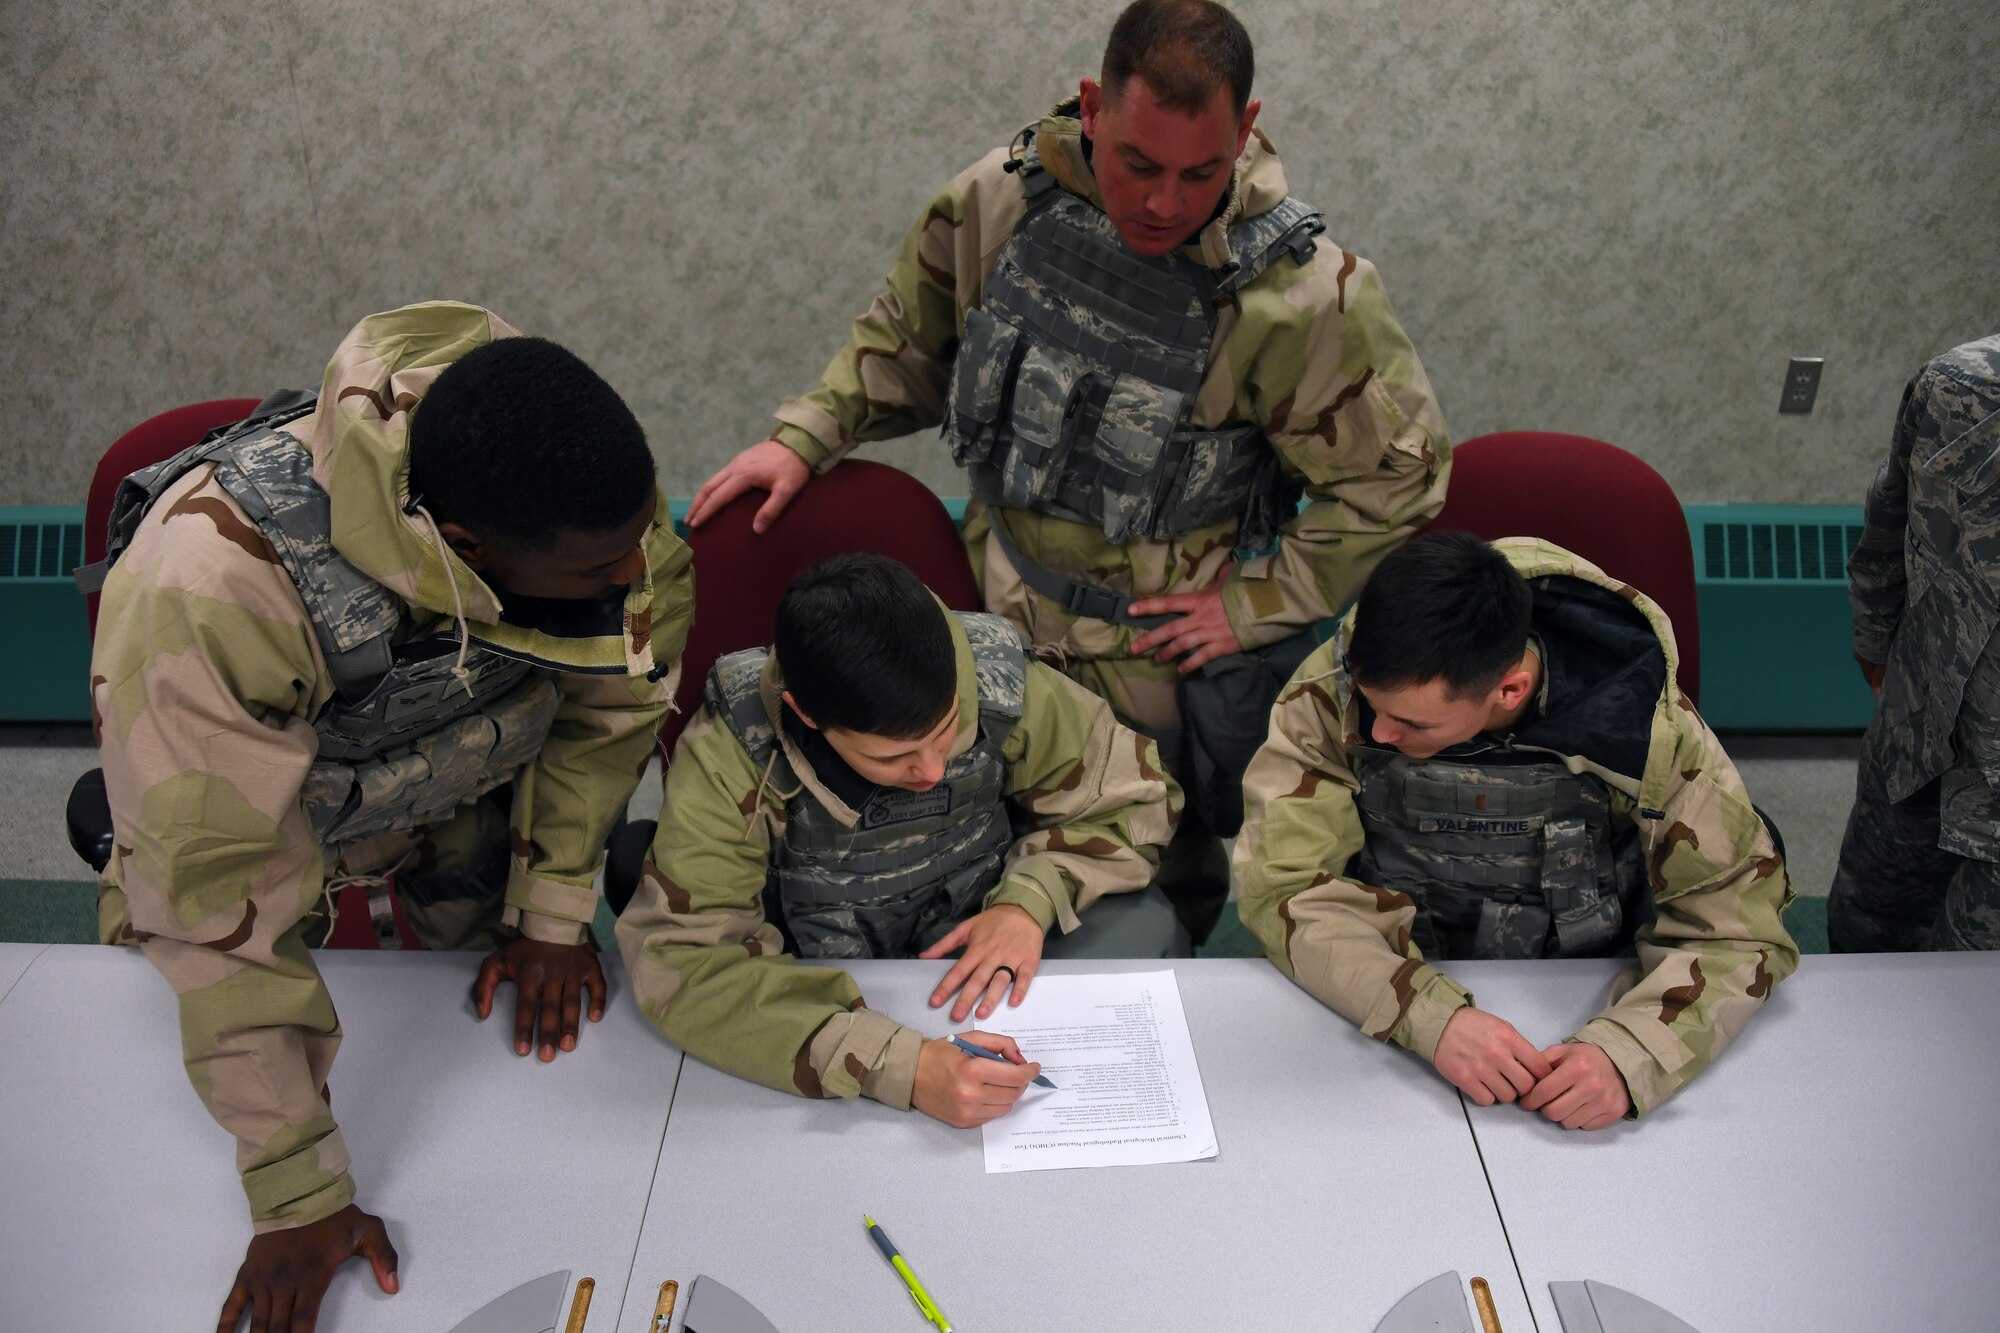 Members of the 319th Security Forces Squadron work together during a readiness competition to complete a written test on chemical, biological, radiological and nuclear weapons May 18, 2018, on Grand Forks Air Force Base, North Dakota. Units across the base created teams of Airmen to participate in the competition, testing their knowledge and application of topics to include CBRN, self-aid and buddy care, weapons assembly, hand-to-hand combat and map-reading. (U.S. Air Force photo by Airman 1st Class Elora J. Martinez)